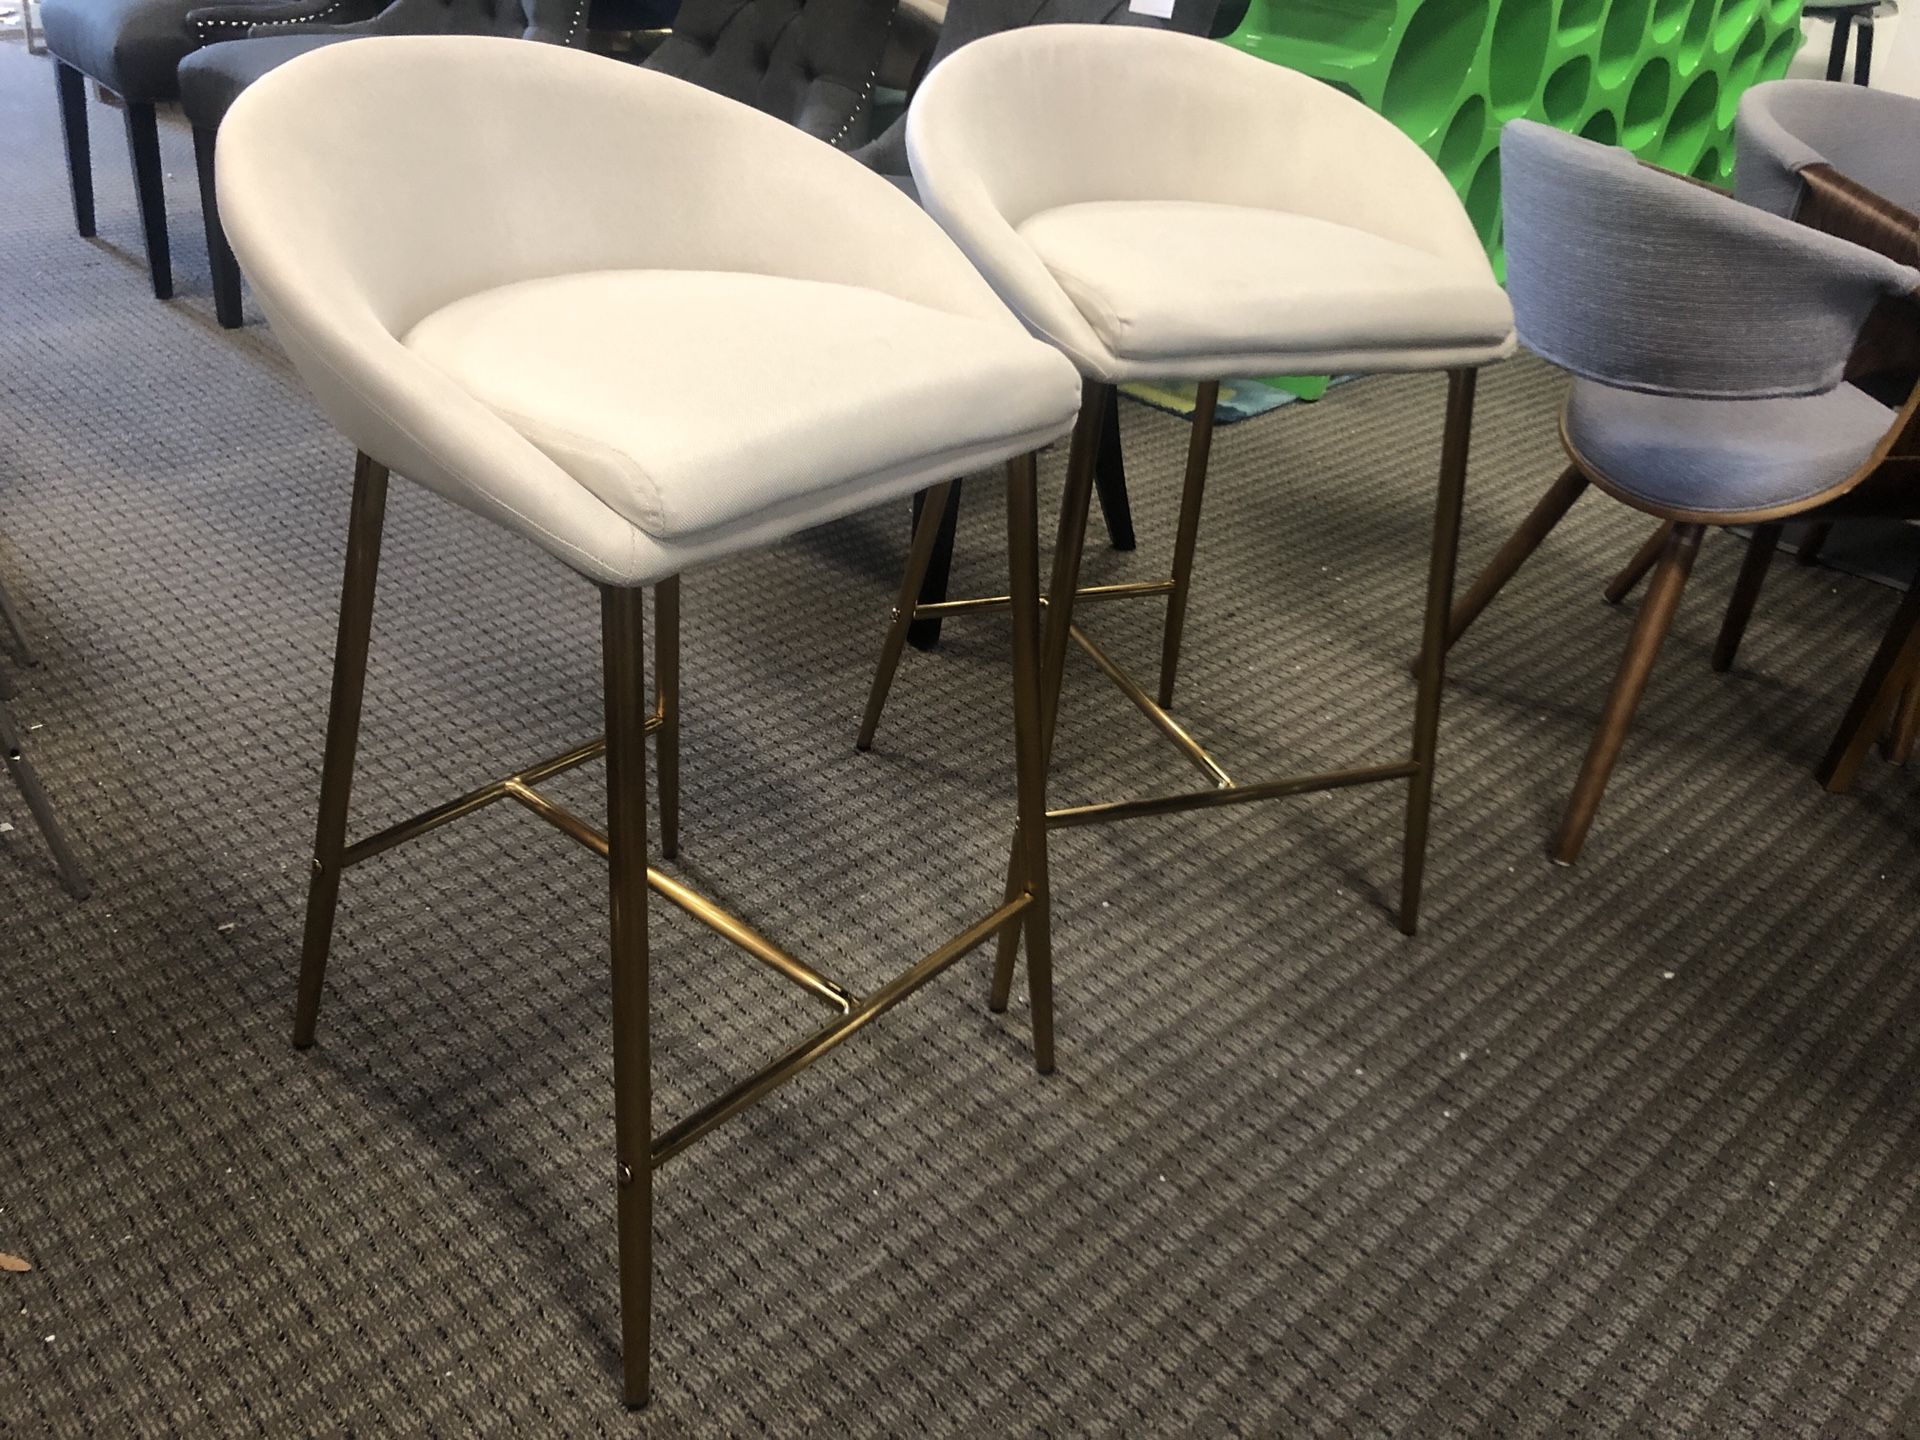 Set of 2 Cream Matisse counter bar stools with gold